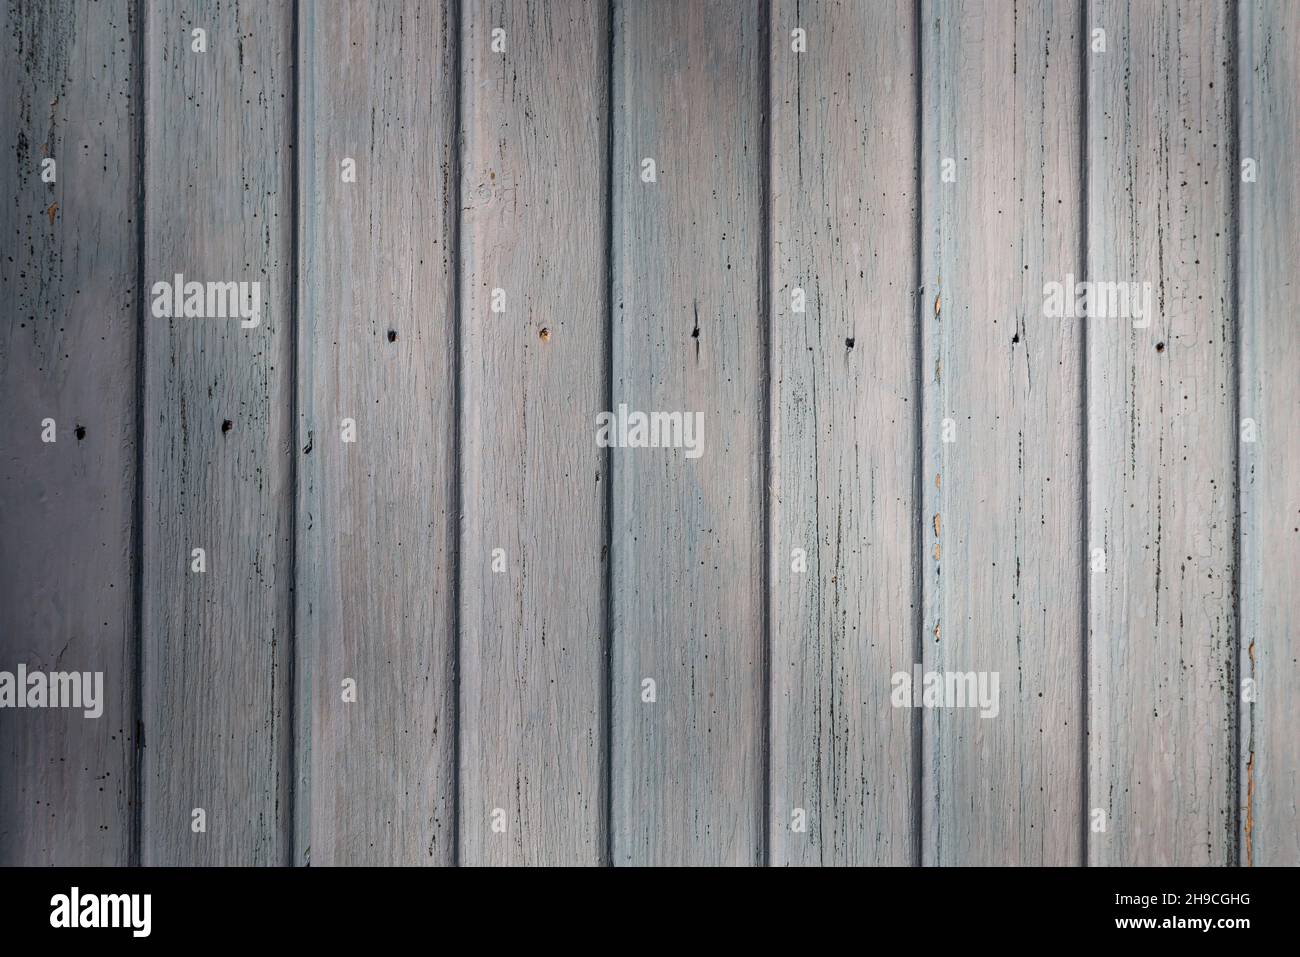 Front view of an old weathered and painted wooden wall or wood paneling. Abstract high resolution full frame textured background. Stock Photo